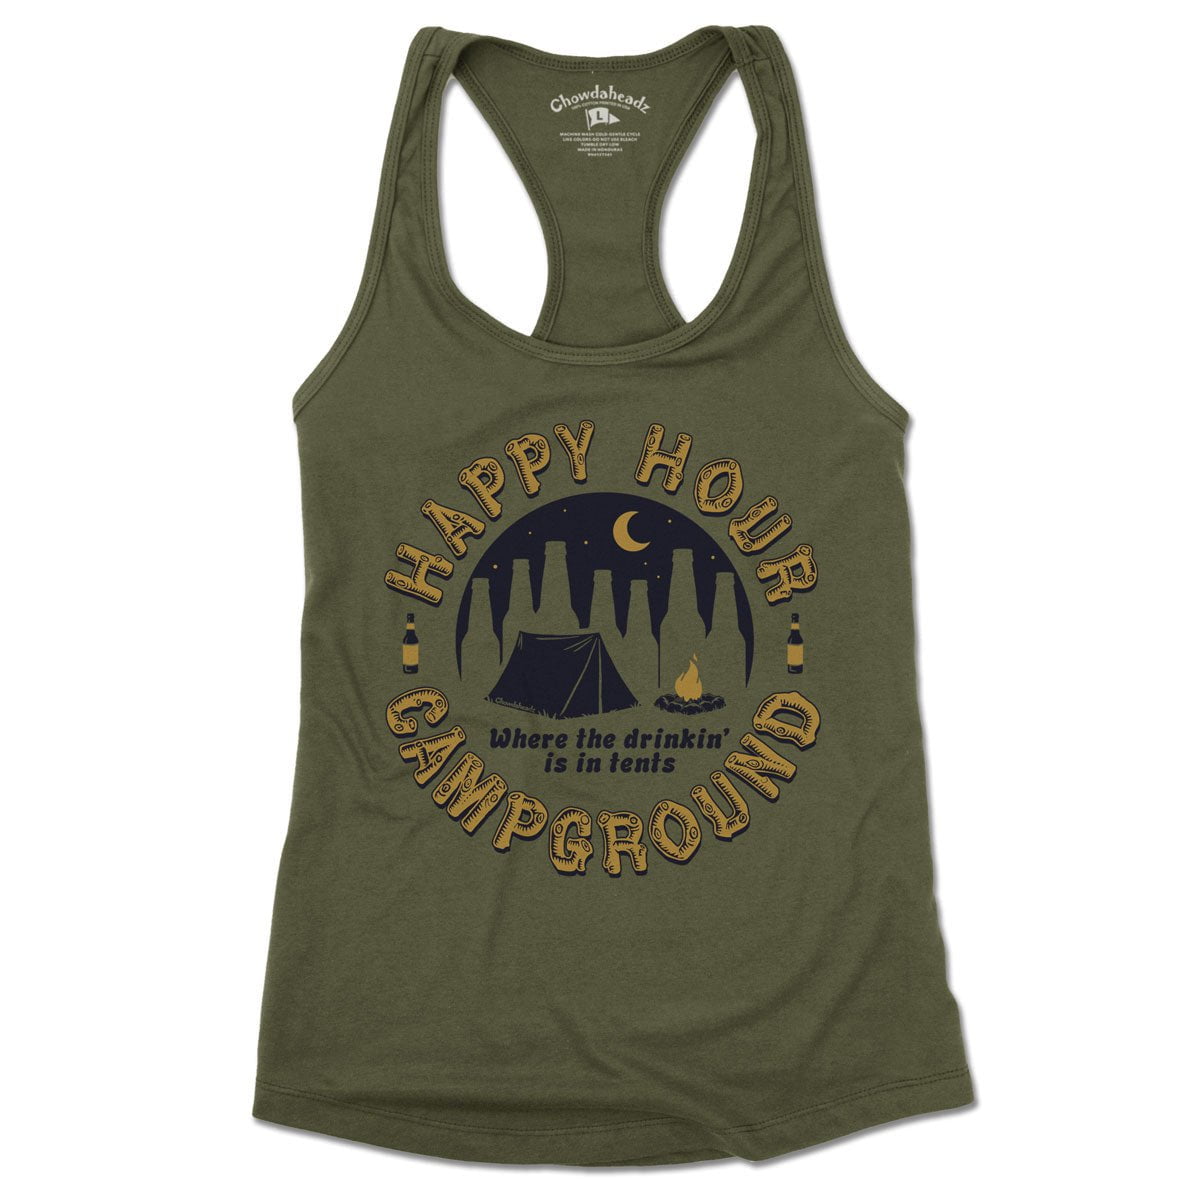 Happy Hour Campground Women's Tank Top (3 Colors) - Chowdaheadz